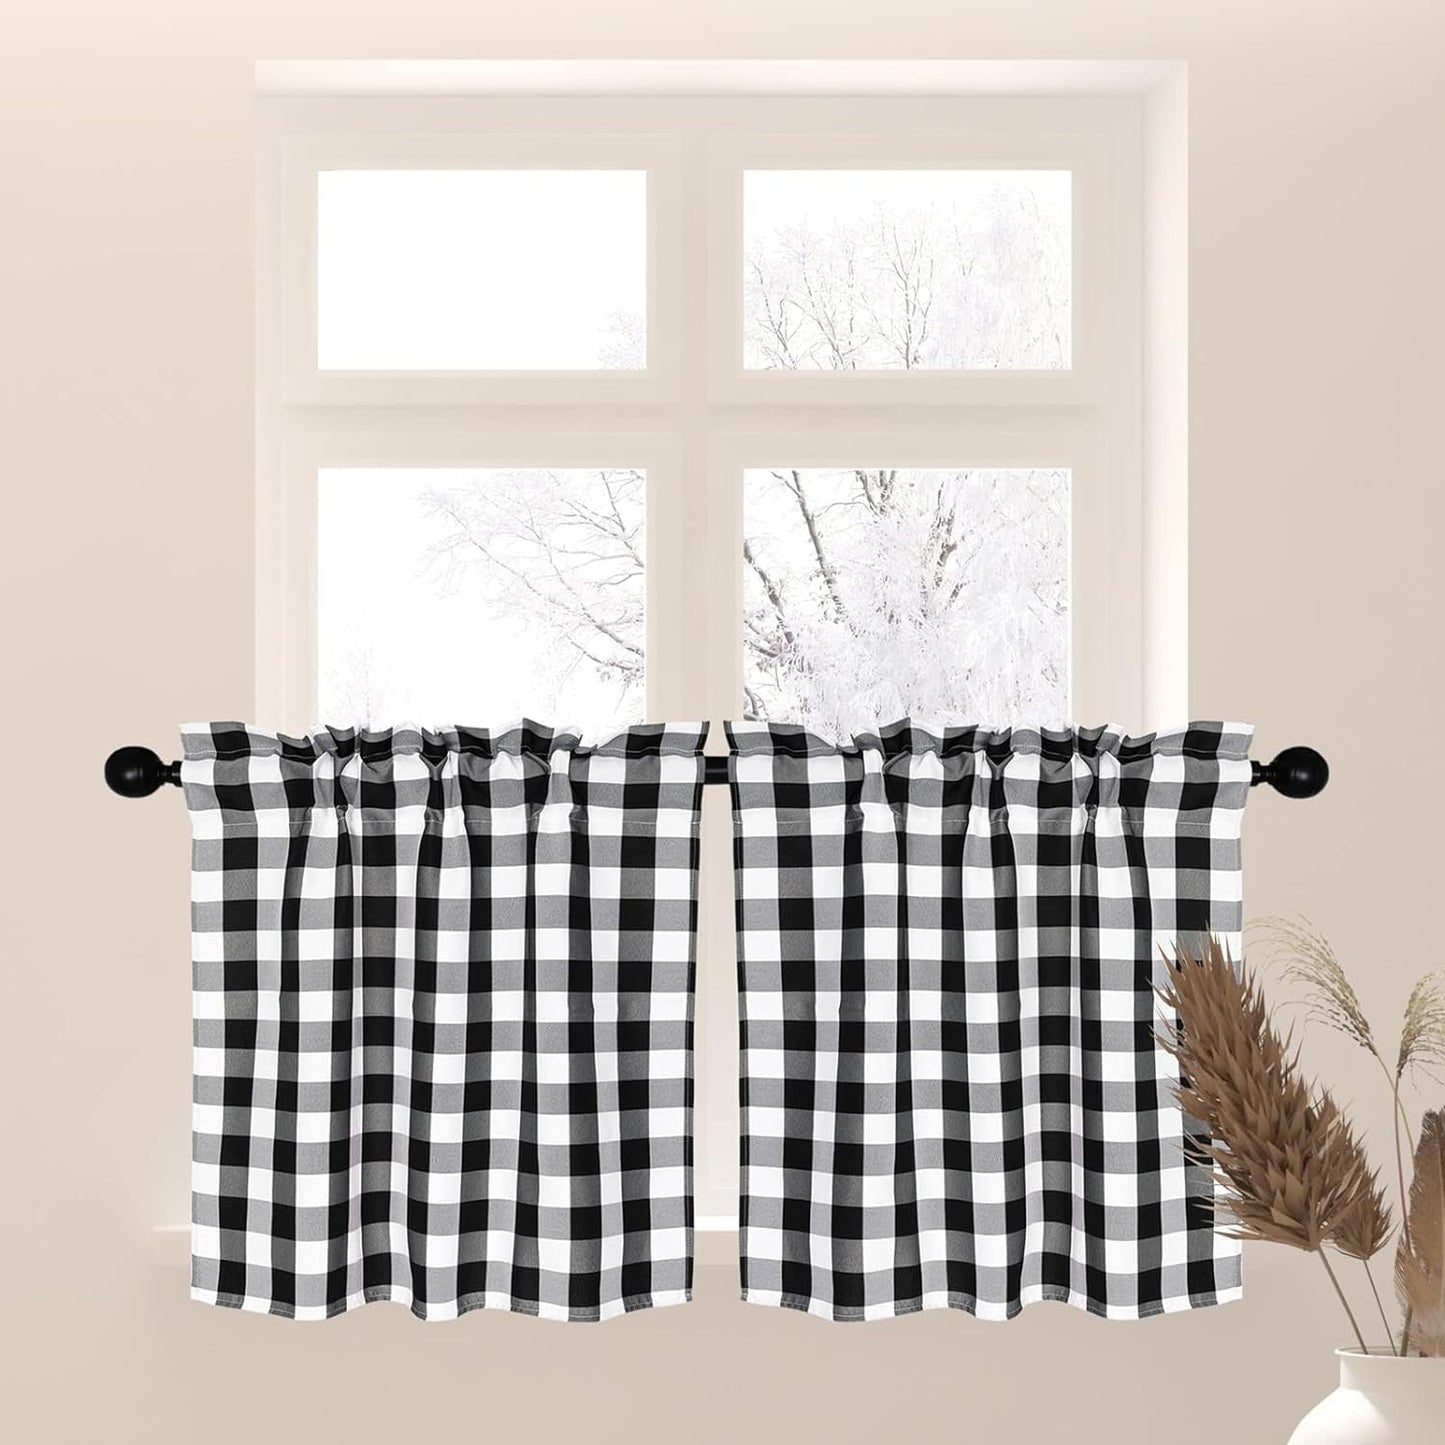 2 Pcs Buffalo Check Swag Curtains 36 Inches Length Rod Pocket Half Small Cafe Window Curtains Farmhouse Plaid Gingham Swag Valance Kitchen Curtains, Black/White, 28X36 Inches